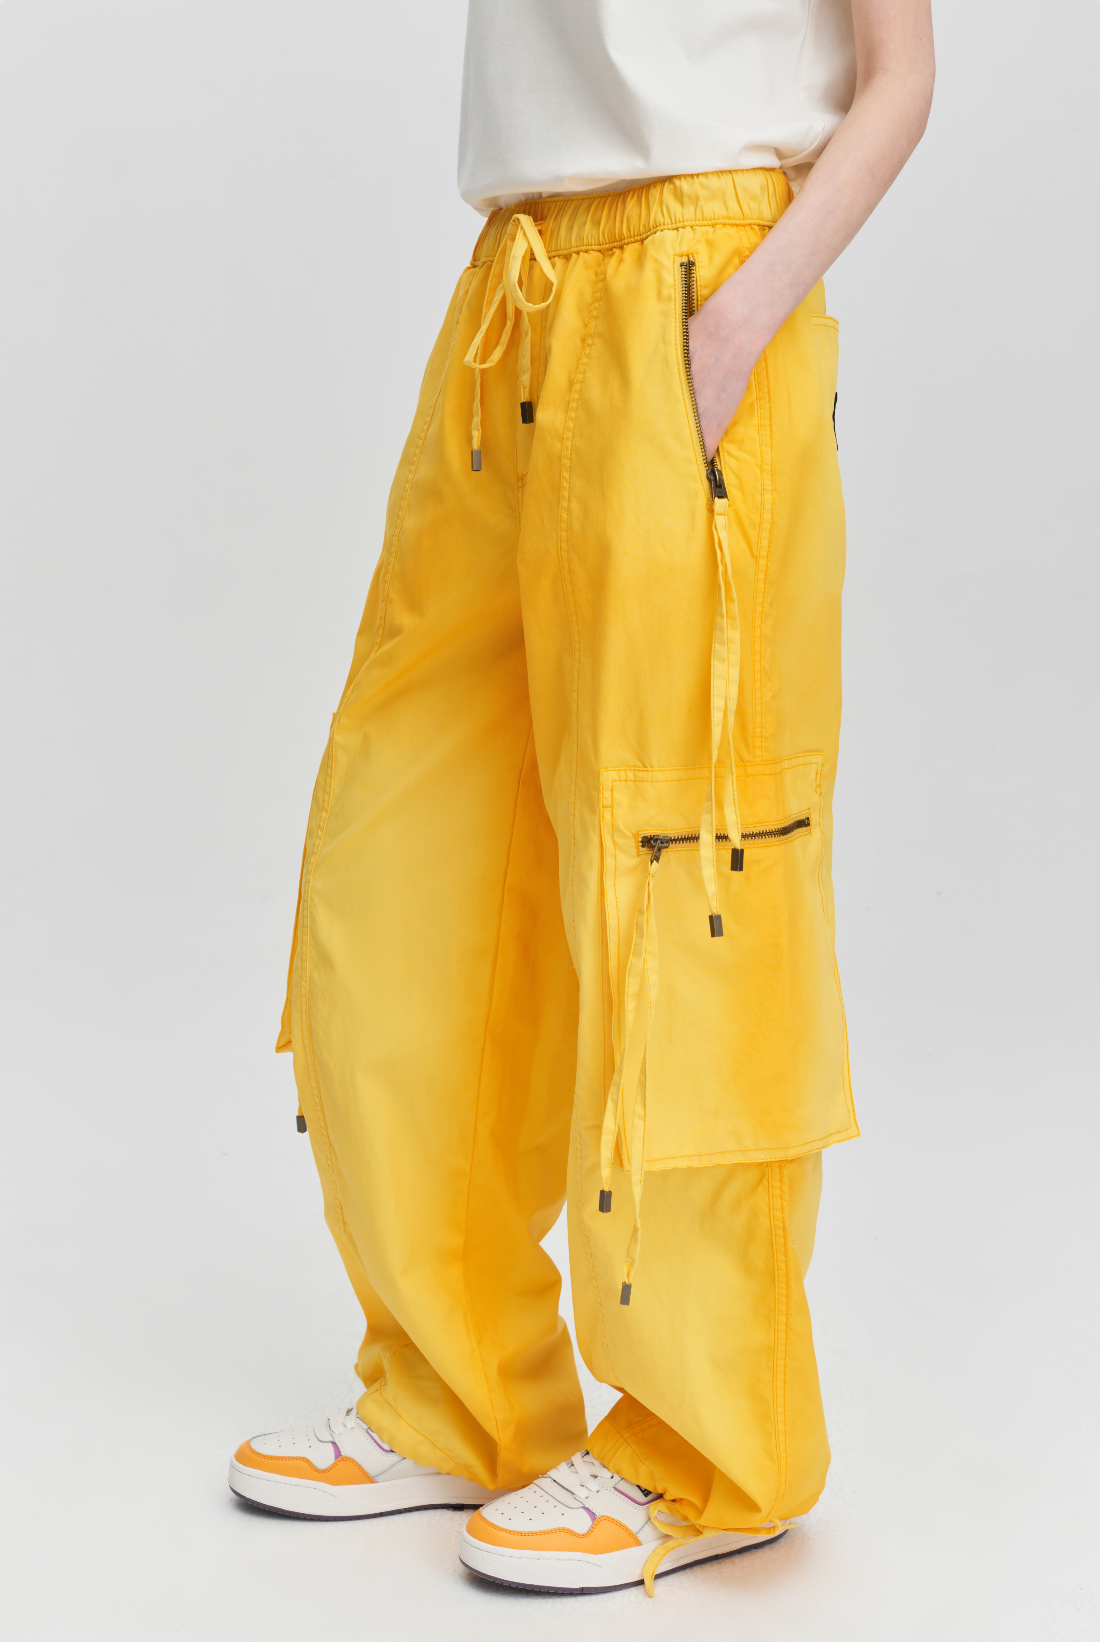 LEE® X ANGEL CHEN CARGO PANT IN YELLOW